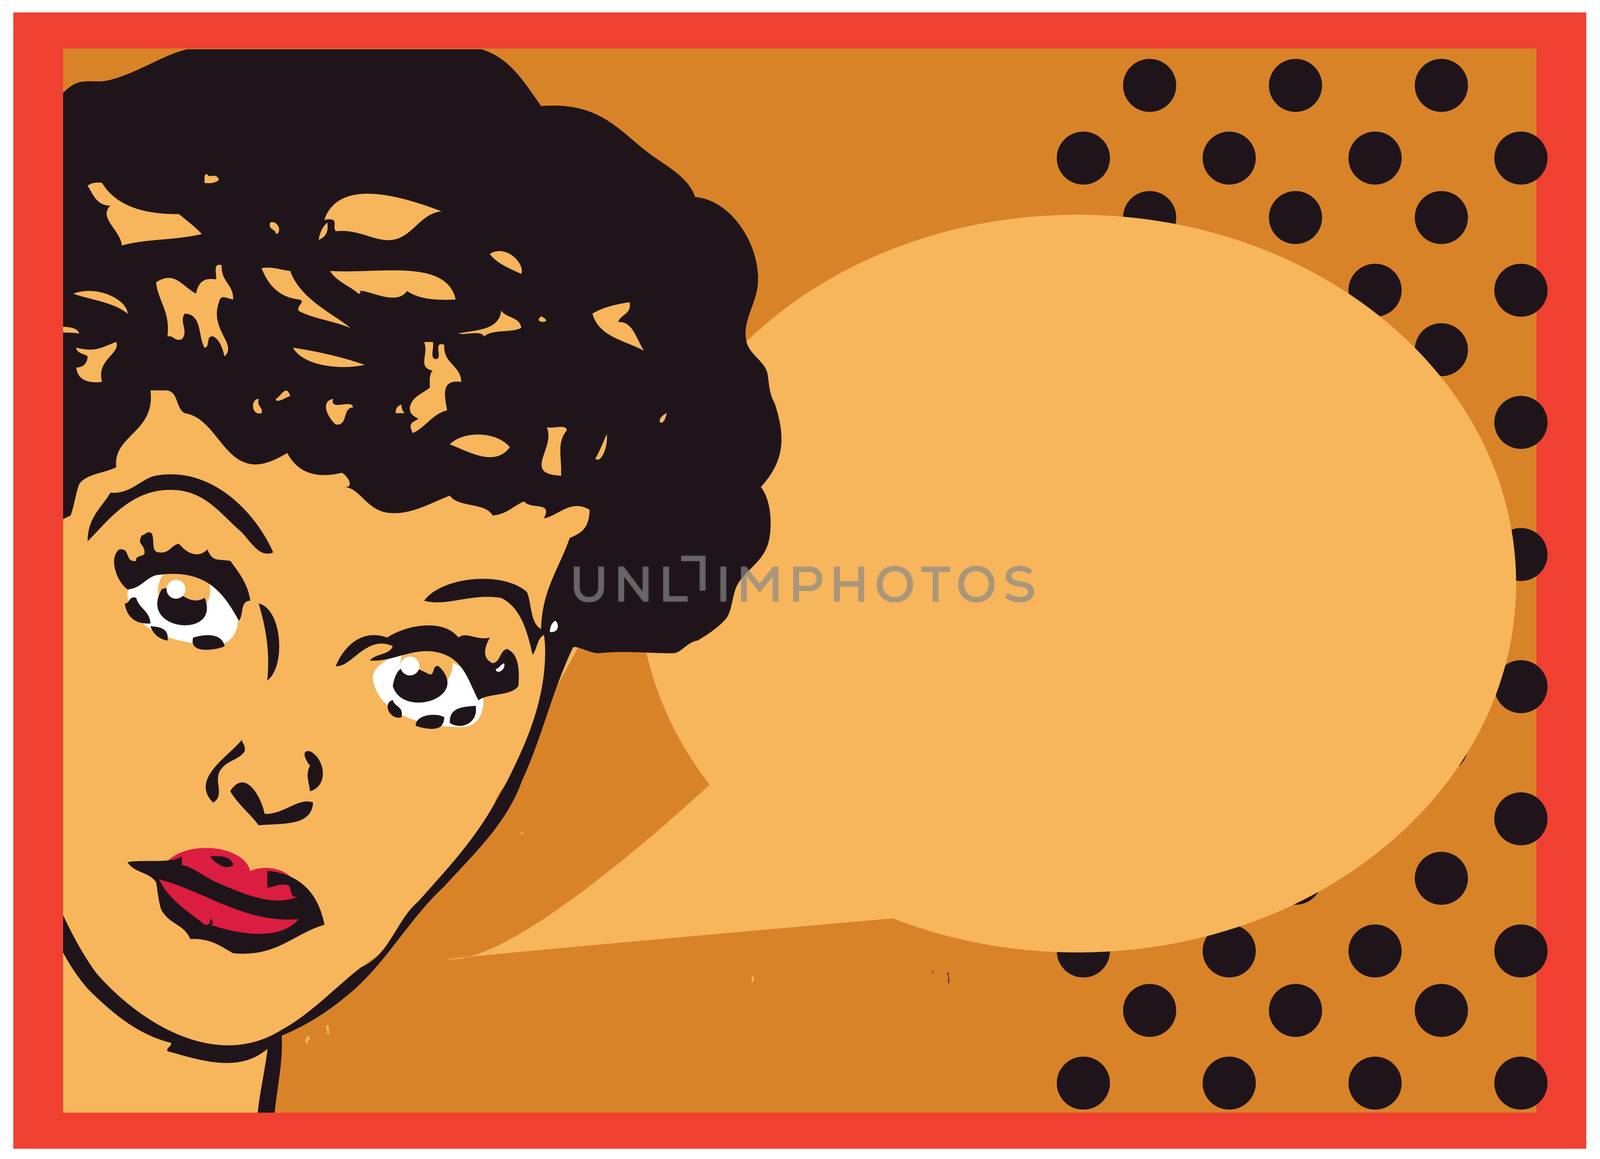 Vintage Retro Clip Art Woman Advertisement Pop Art Girl Talking with open eyes card or retro background